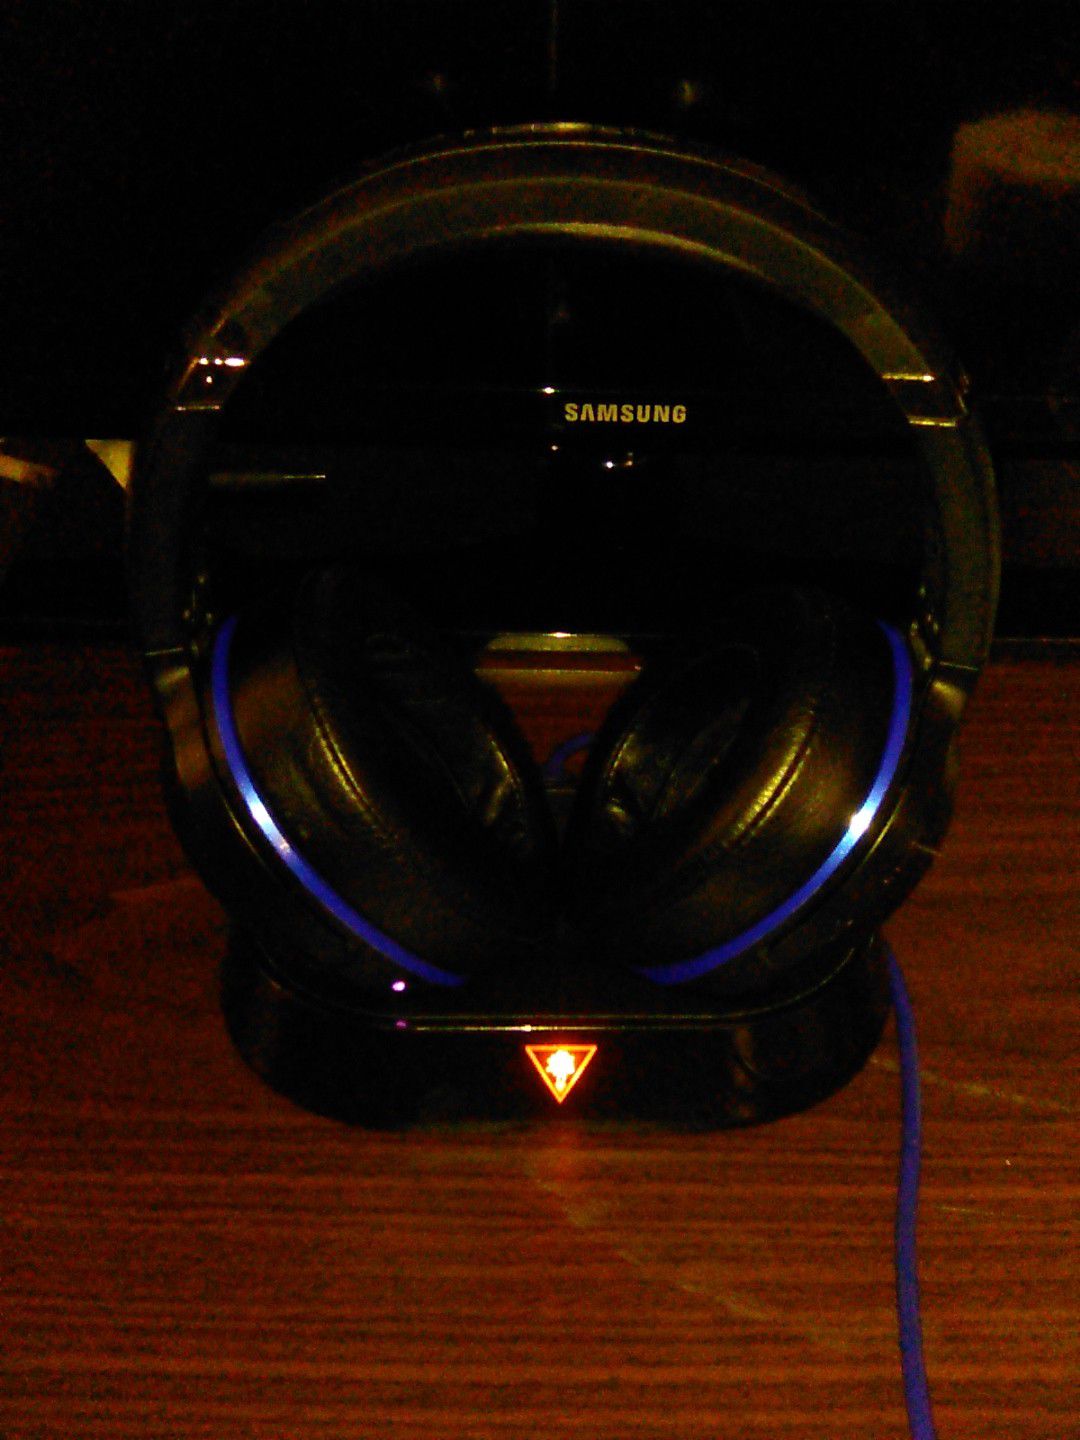 Turtle Beach Ear Force Elite 800x RX Gaming Headset and charger